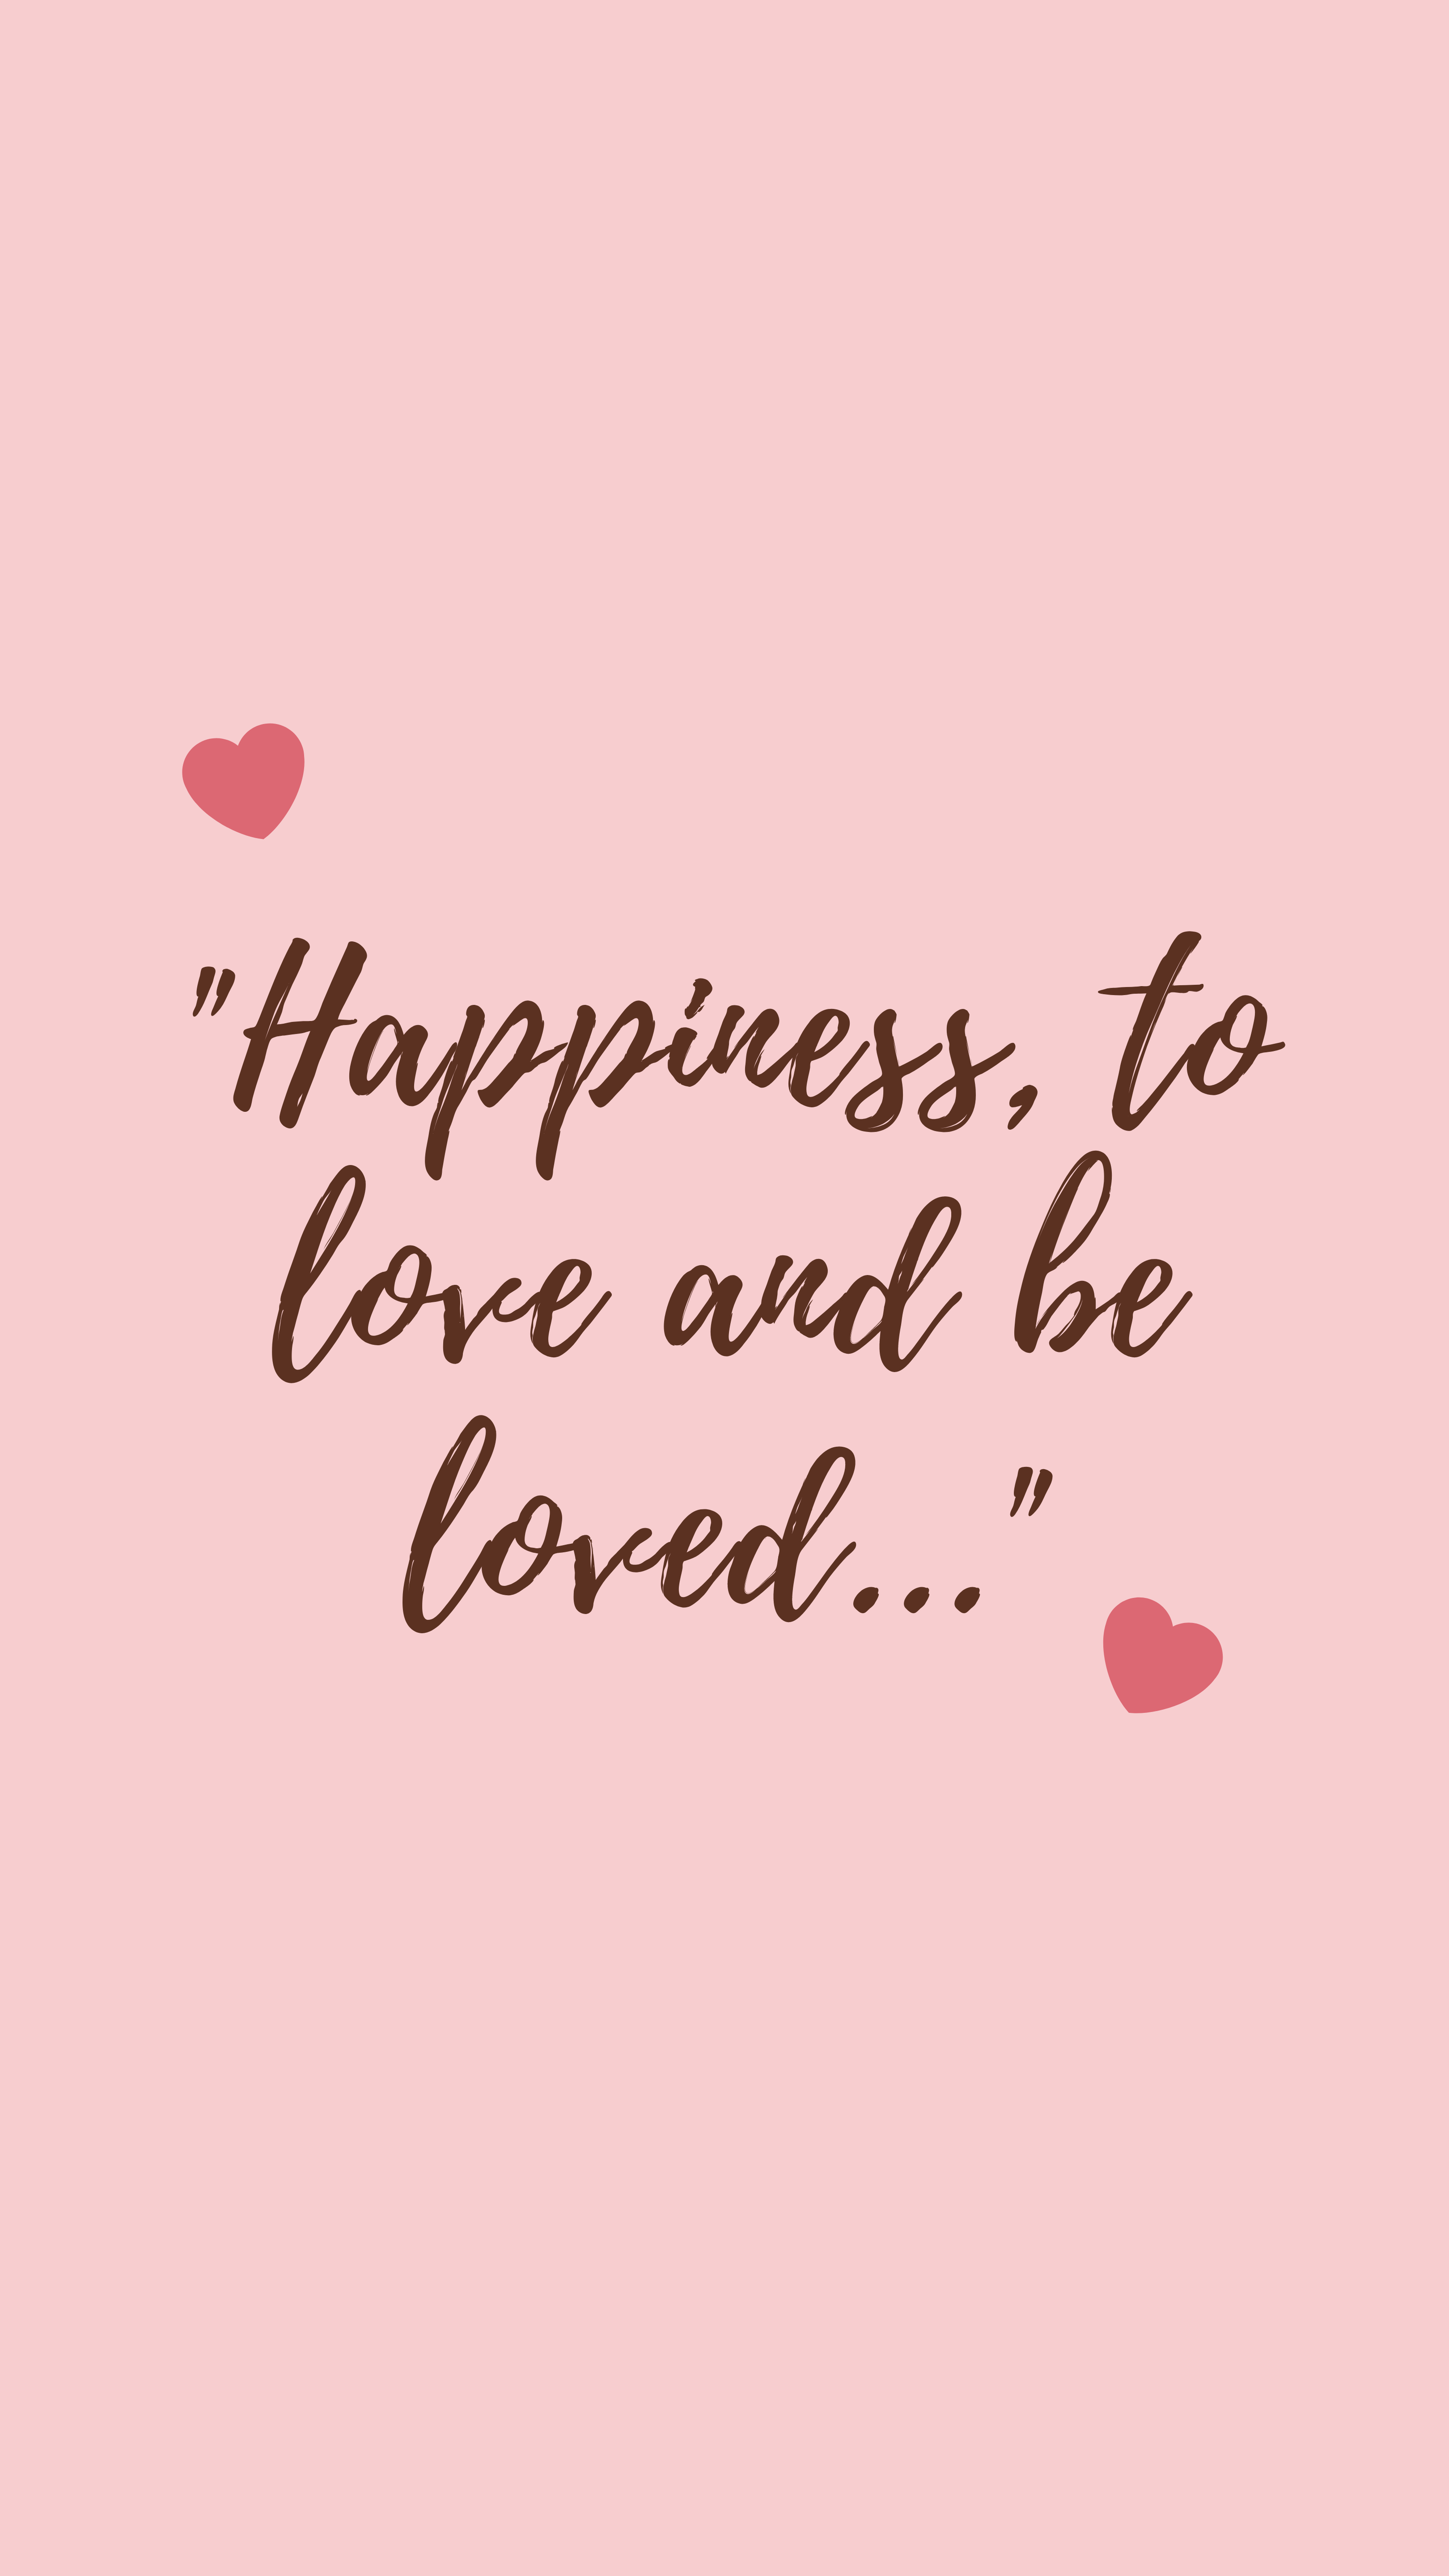 happiness, words, love, phrase, quote, quotation, feelings